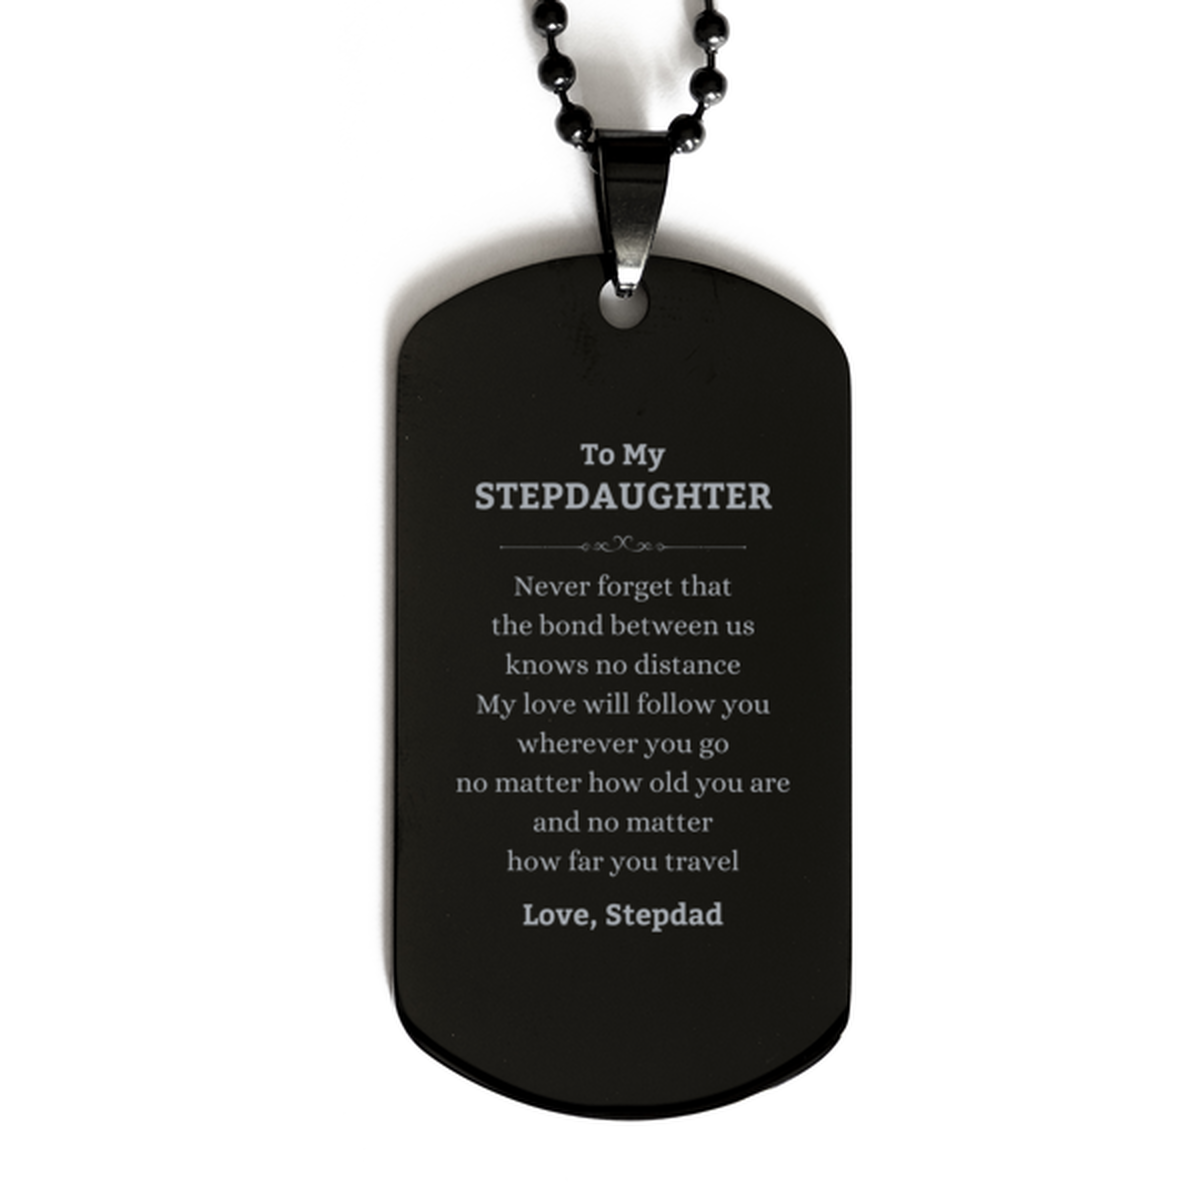 Stepdaughter Birthday Gifts from Stepdad, Adjustable Black Dog Tag for Stepdaughter Christmas Graduation Unique Gifts Stepdaughter Never forget that the bond between us knows no distance. Love, Stepdad